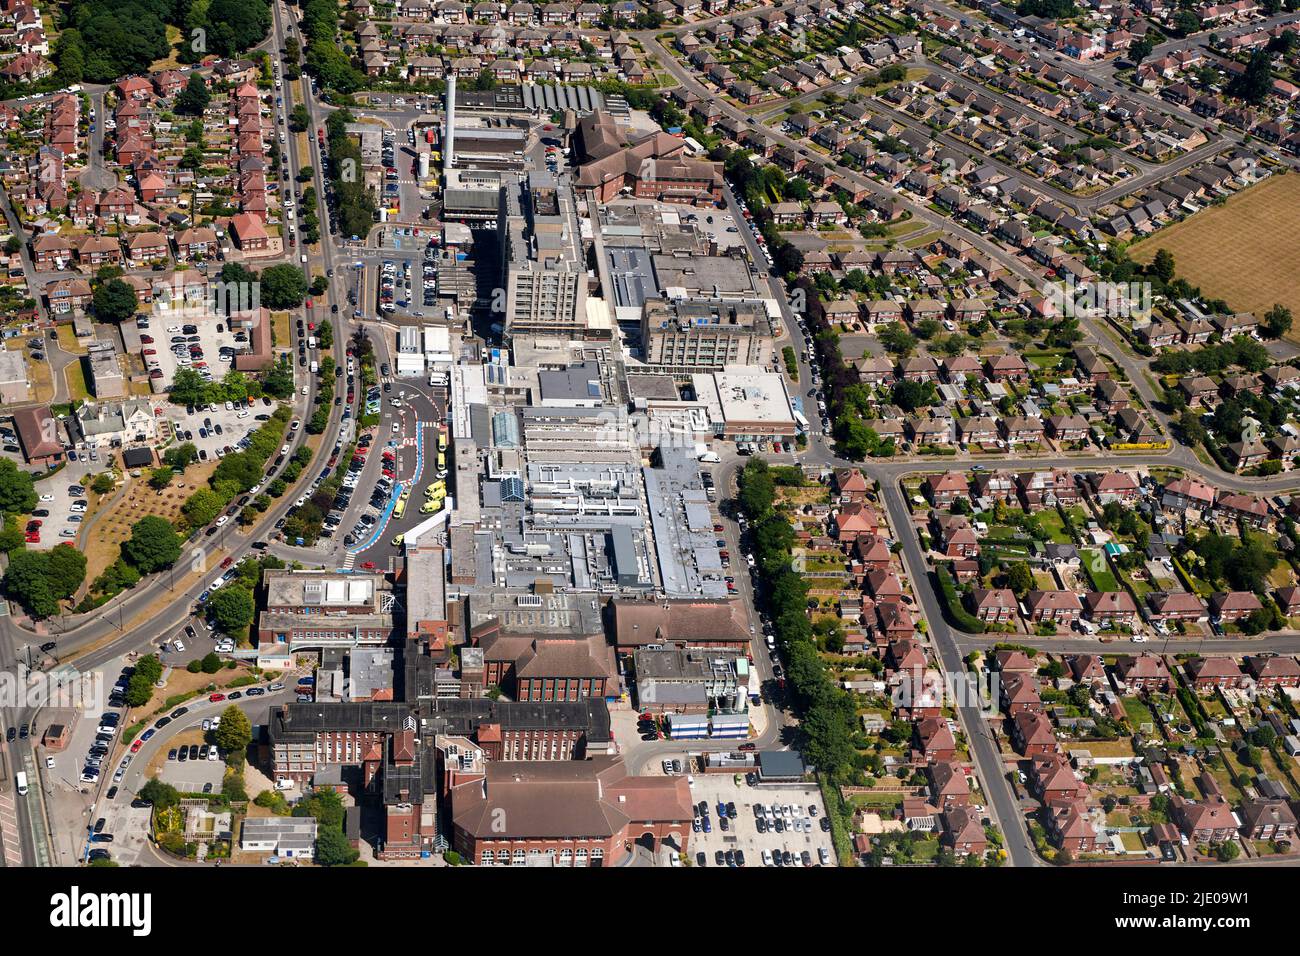 An aerial view of The Royal Infirmary, City of Doncaster, South Yorkshire, Northern England, UK Stock Photo